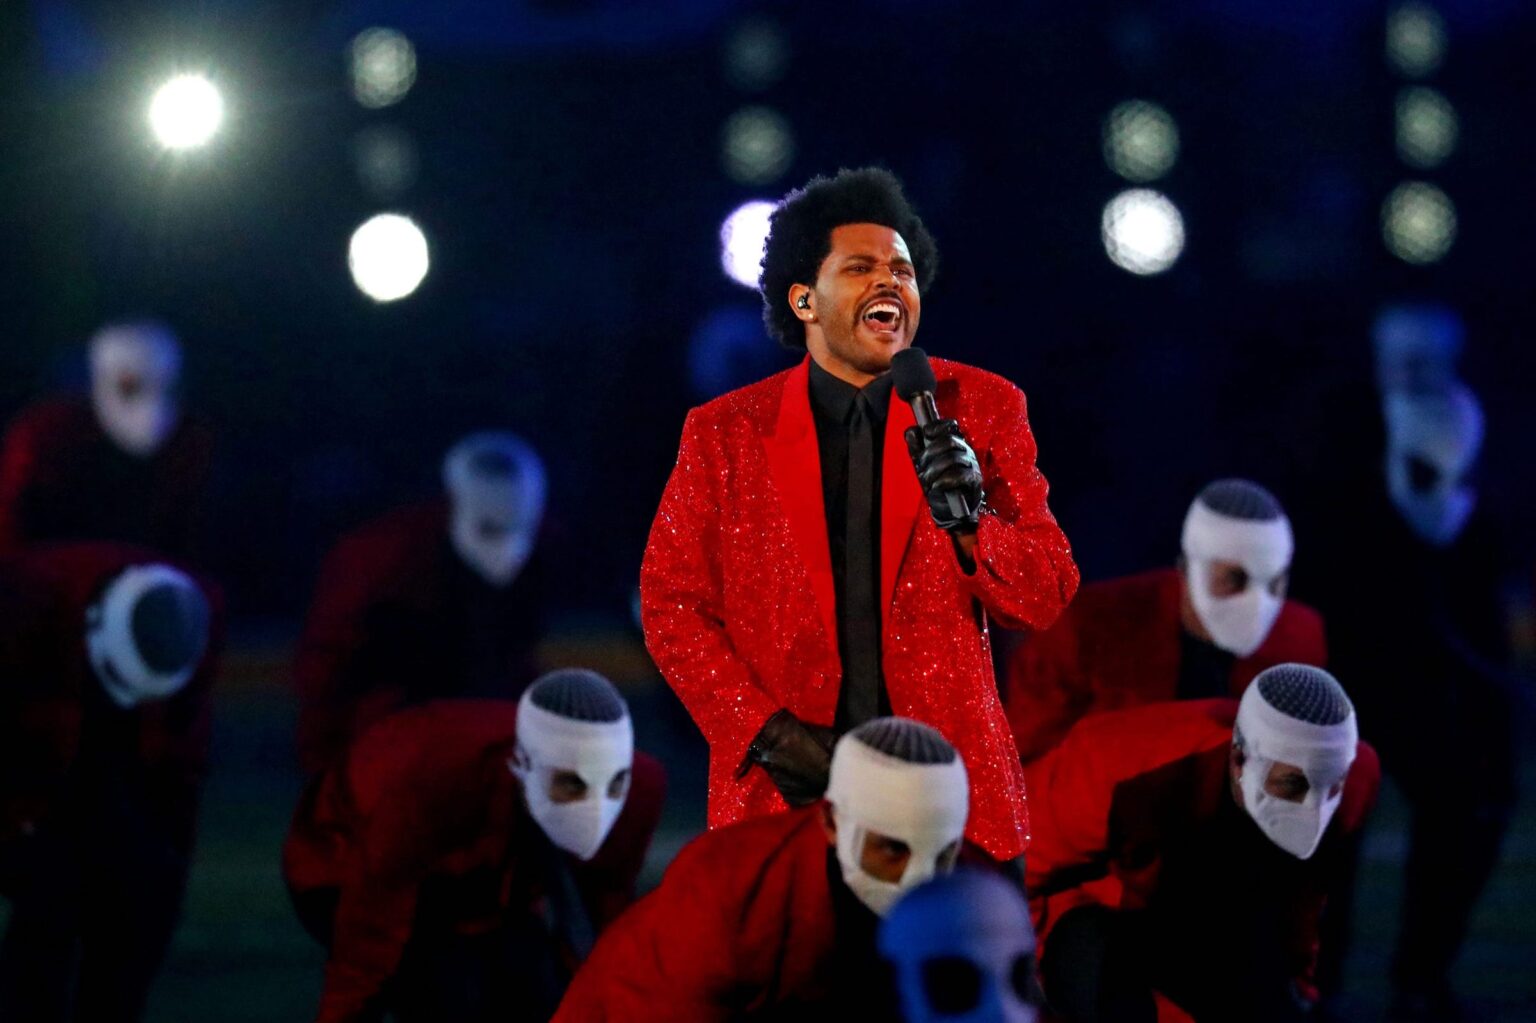 "Blinding Lights" singer The Weeknd has had a steady stay in the headlines over the past year. Why did his dancers wear face bandages?